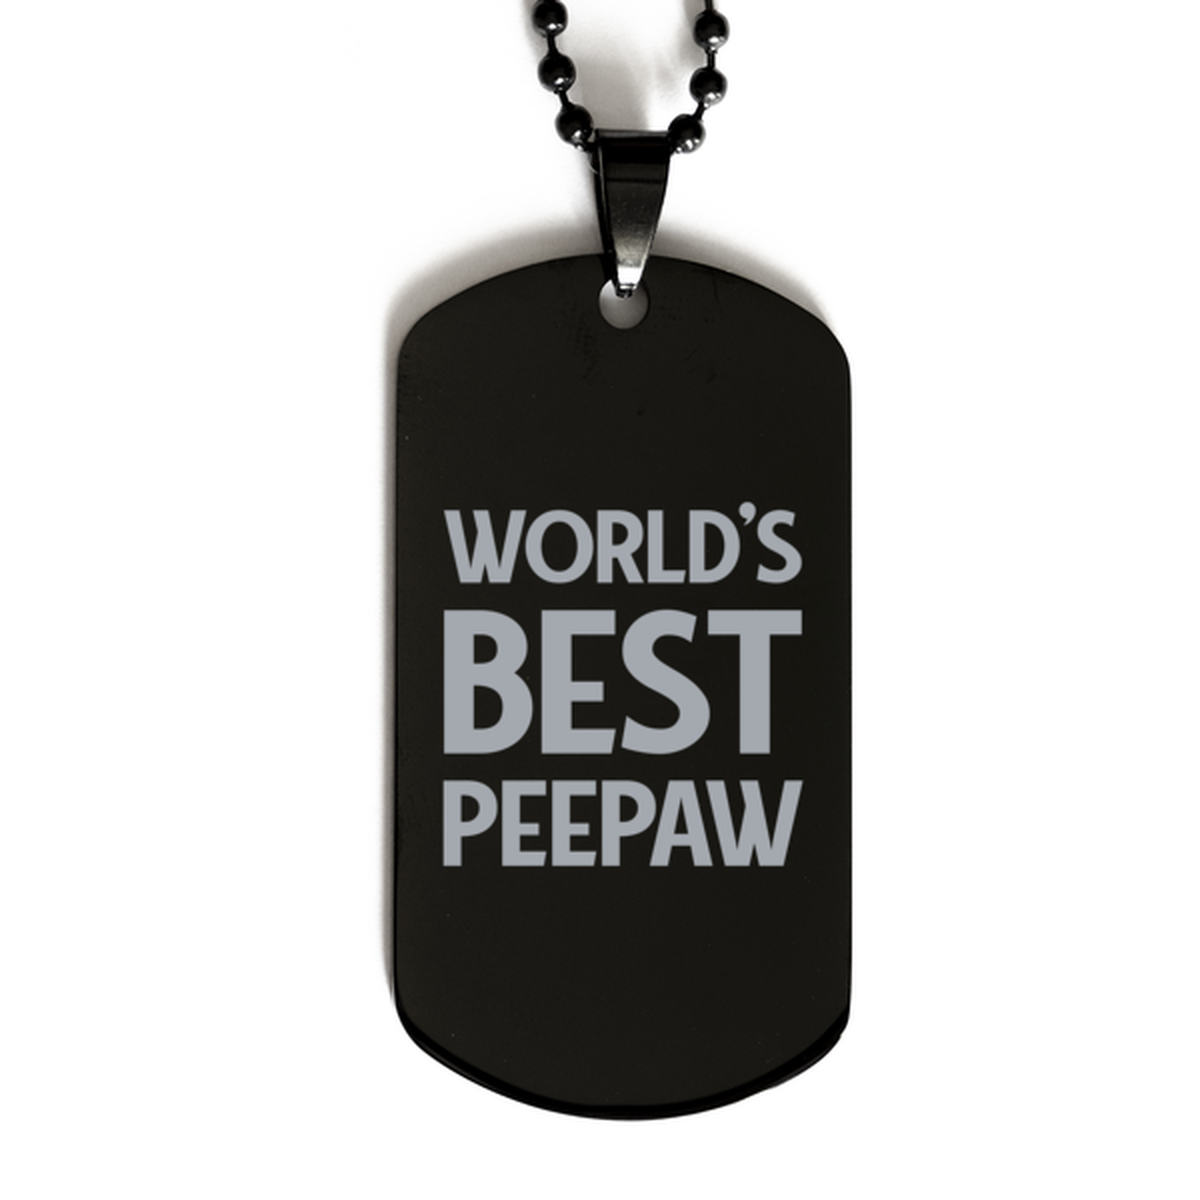 Worlds Best Peepaw Gifts, Funny Black Engraved Dog Tag For Peepaw, Birthday Presents For Men